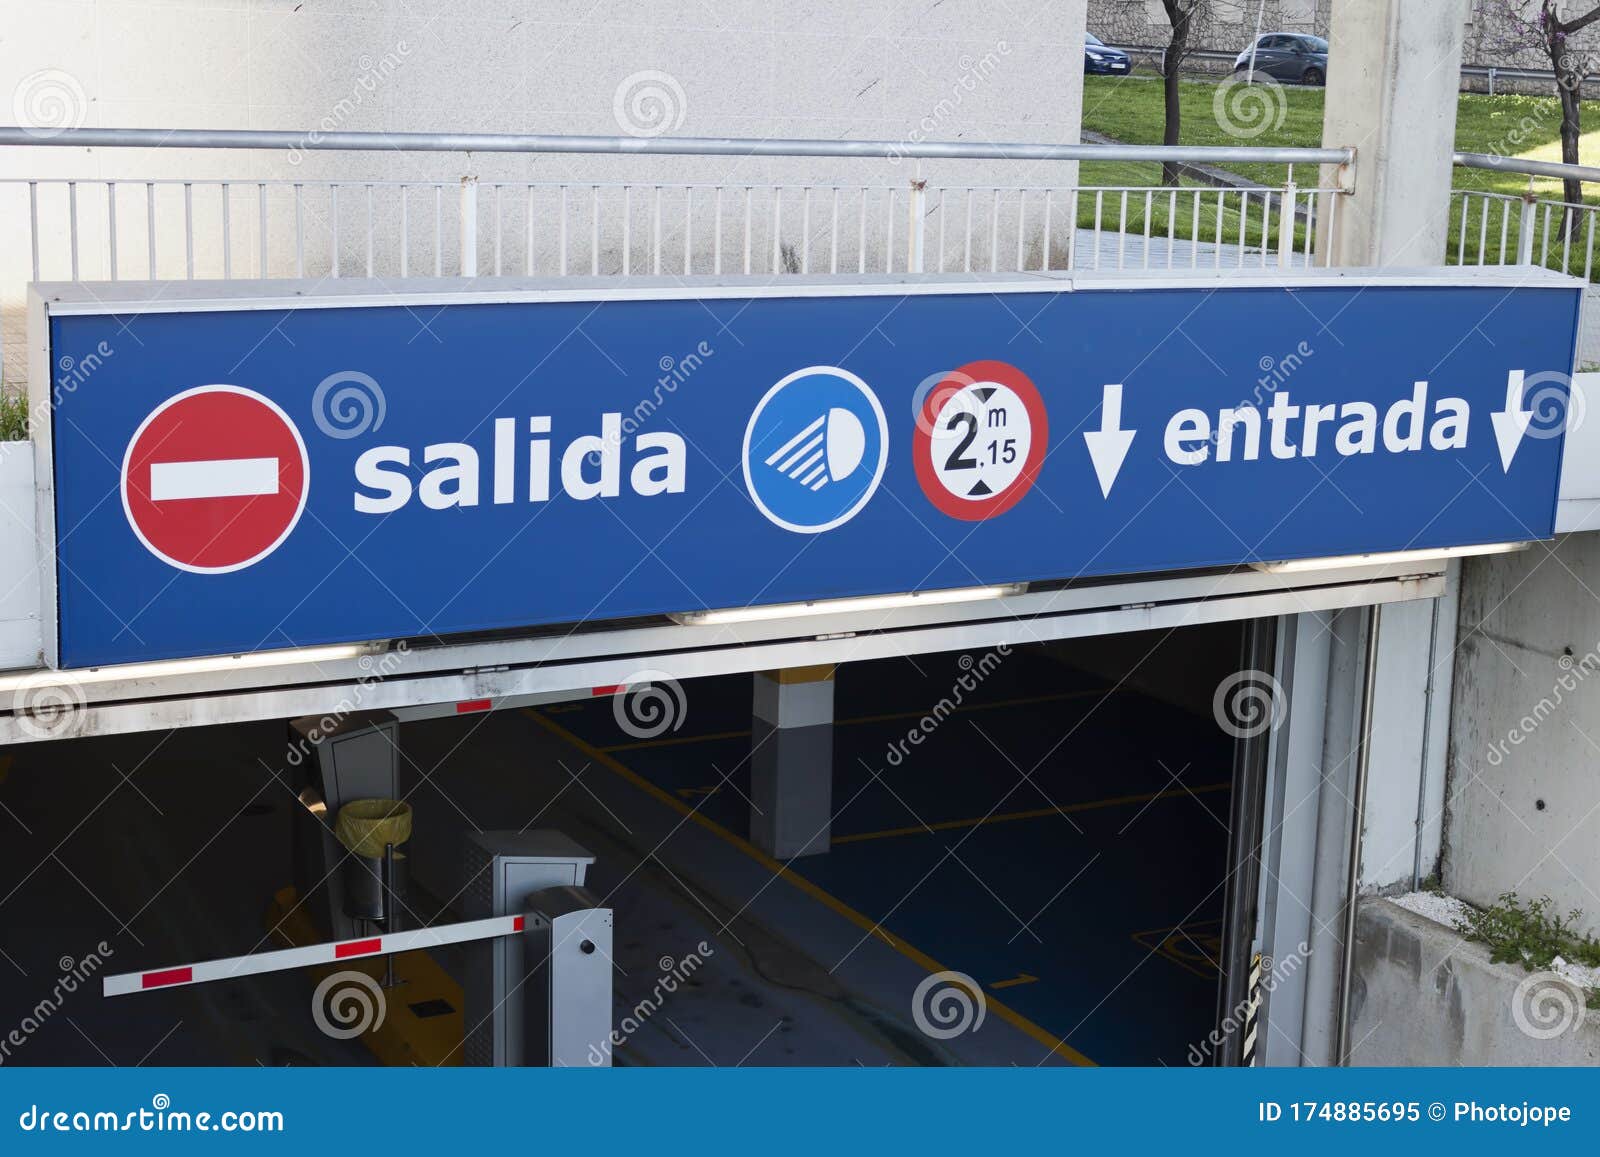 salida, entrada sign at underground parking entrance. exit, entry in spanish